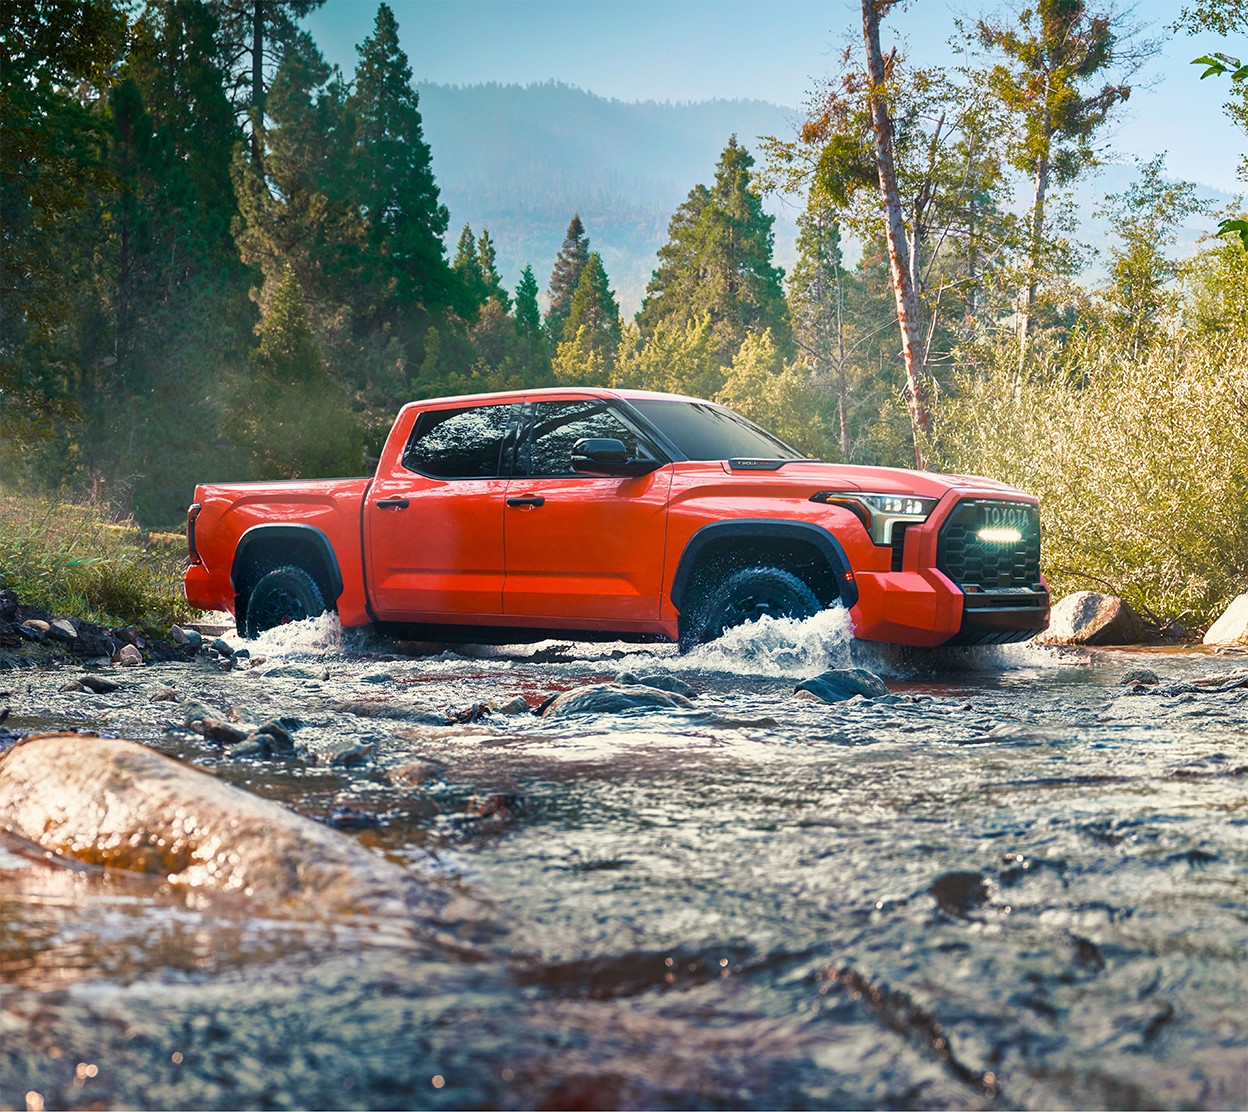 A red Toyota truck crosses a creek with trees and mountains in the background.